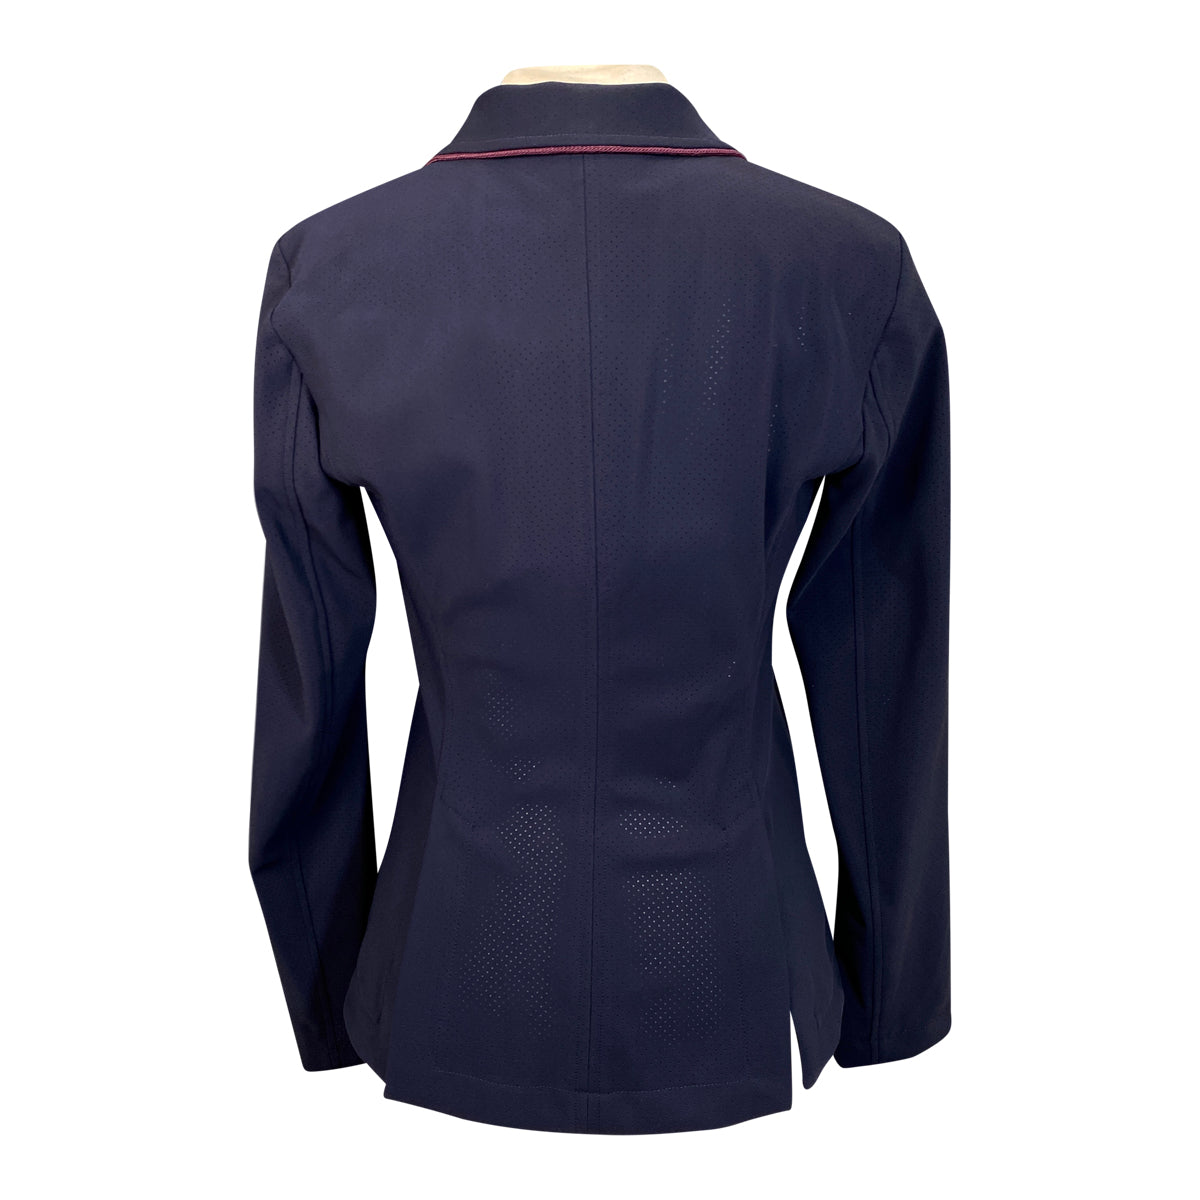 Equiline 'CozyC' Competition Jacket in Navy